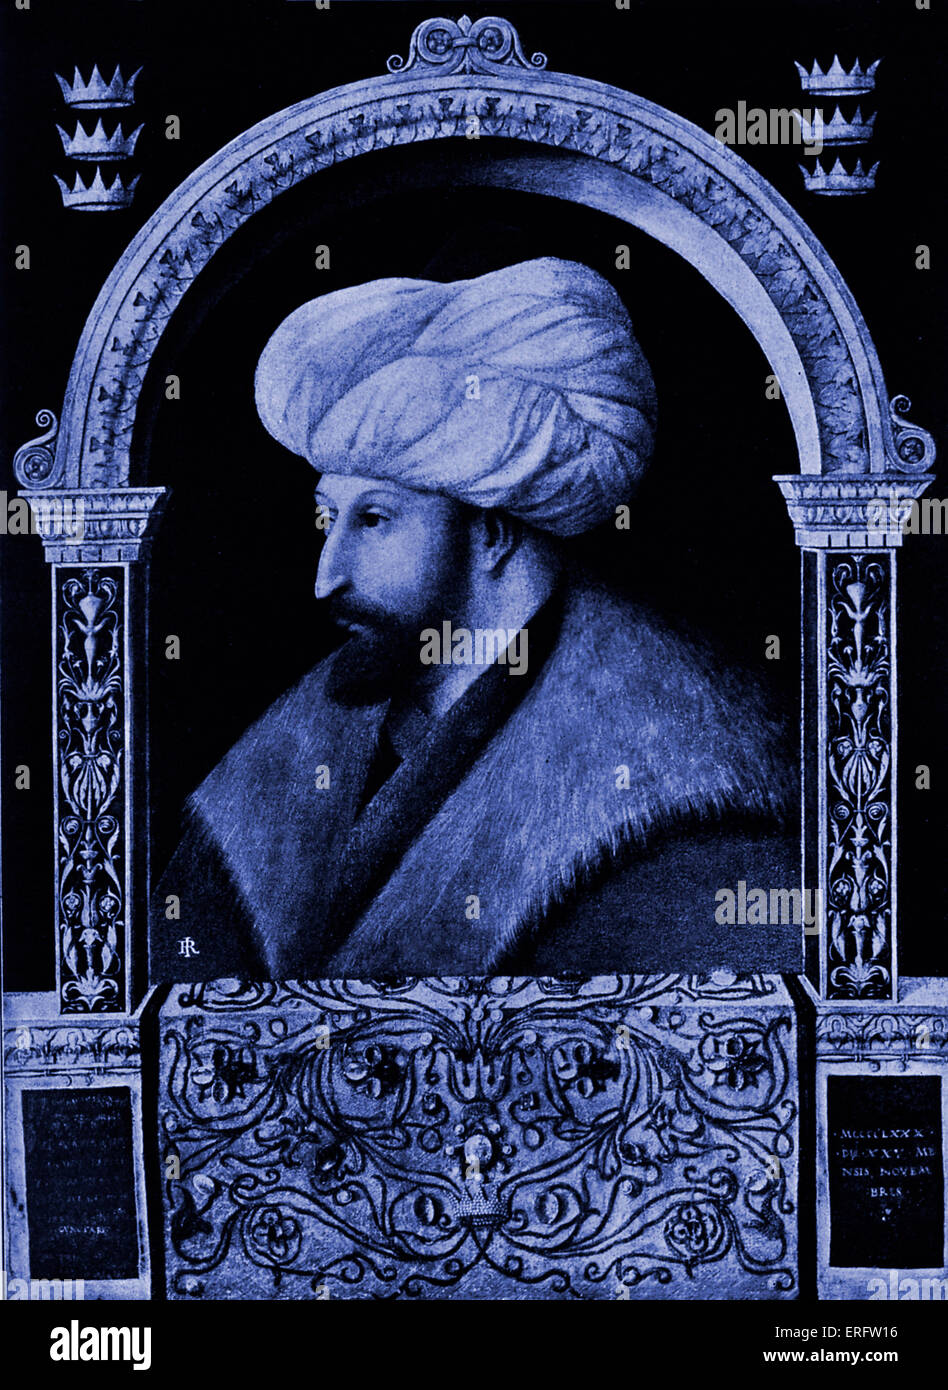 Sultan Muhammad II (also known as Mehmet II or Muhammad the Conqueror) - painting by Gentile Bellini.  Reign: 1432-1481 Stock Photo